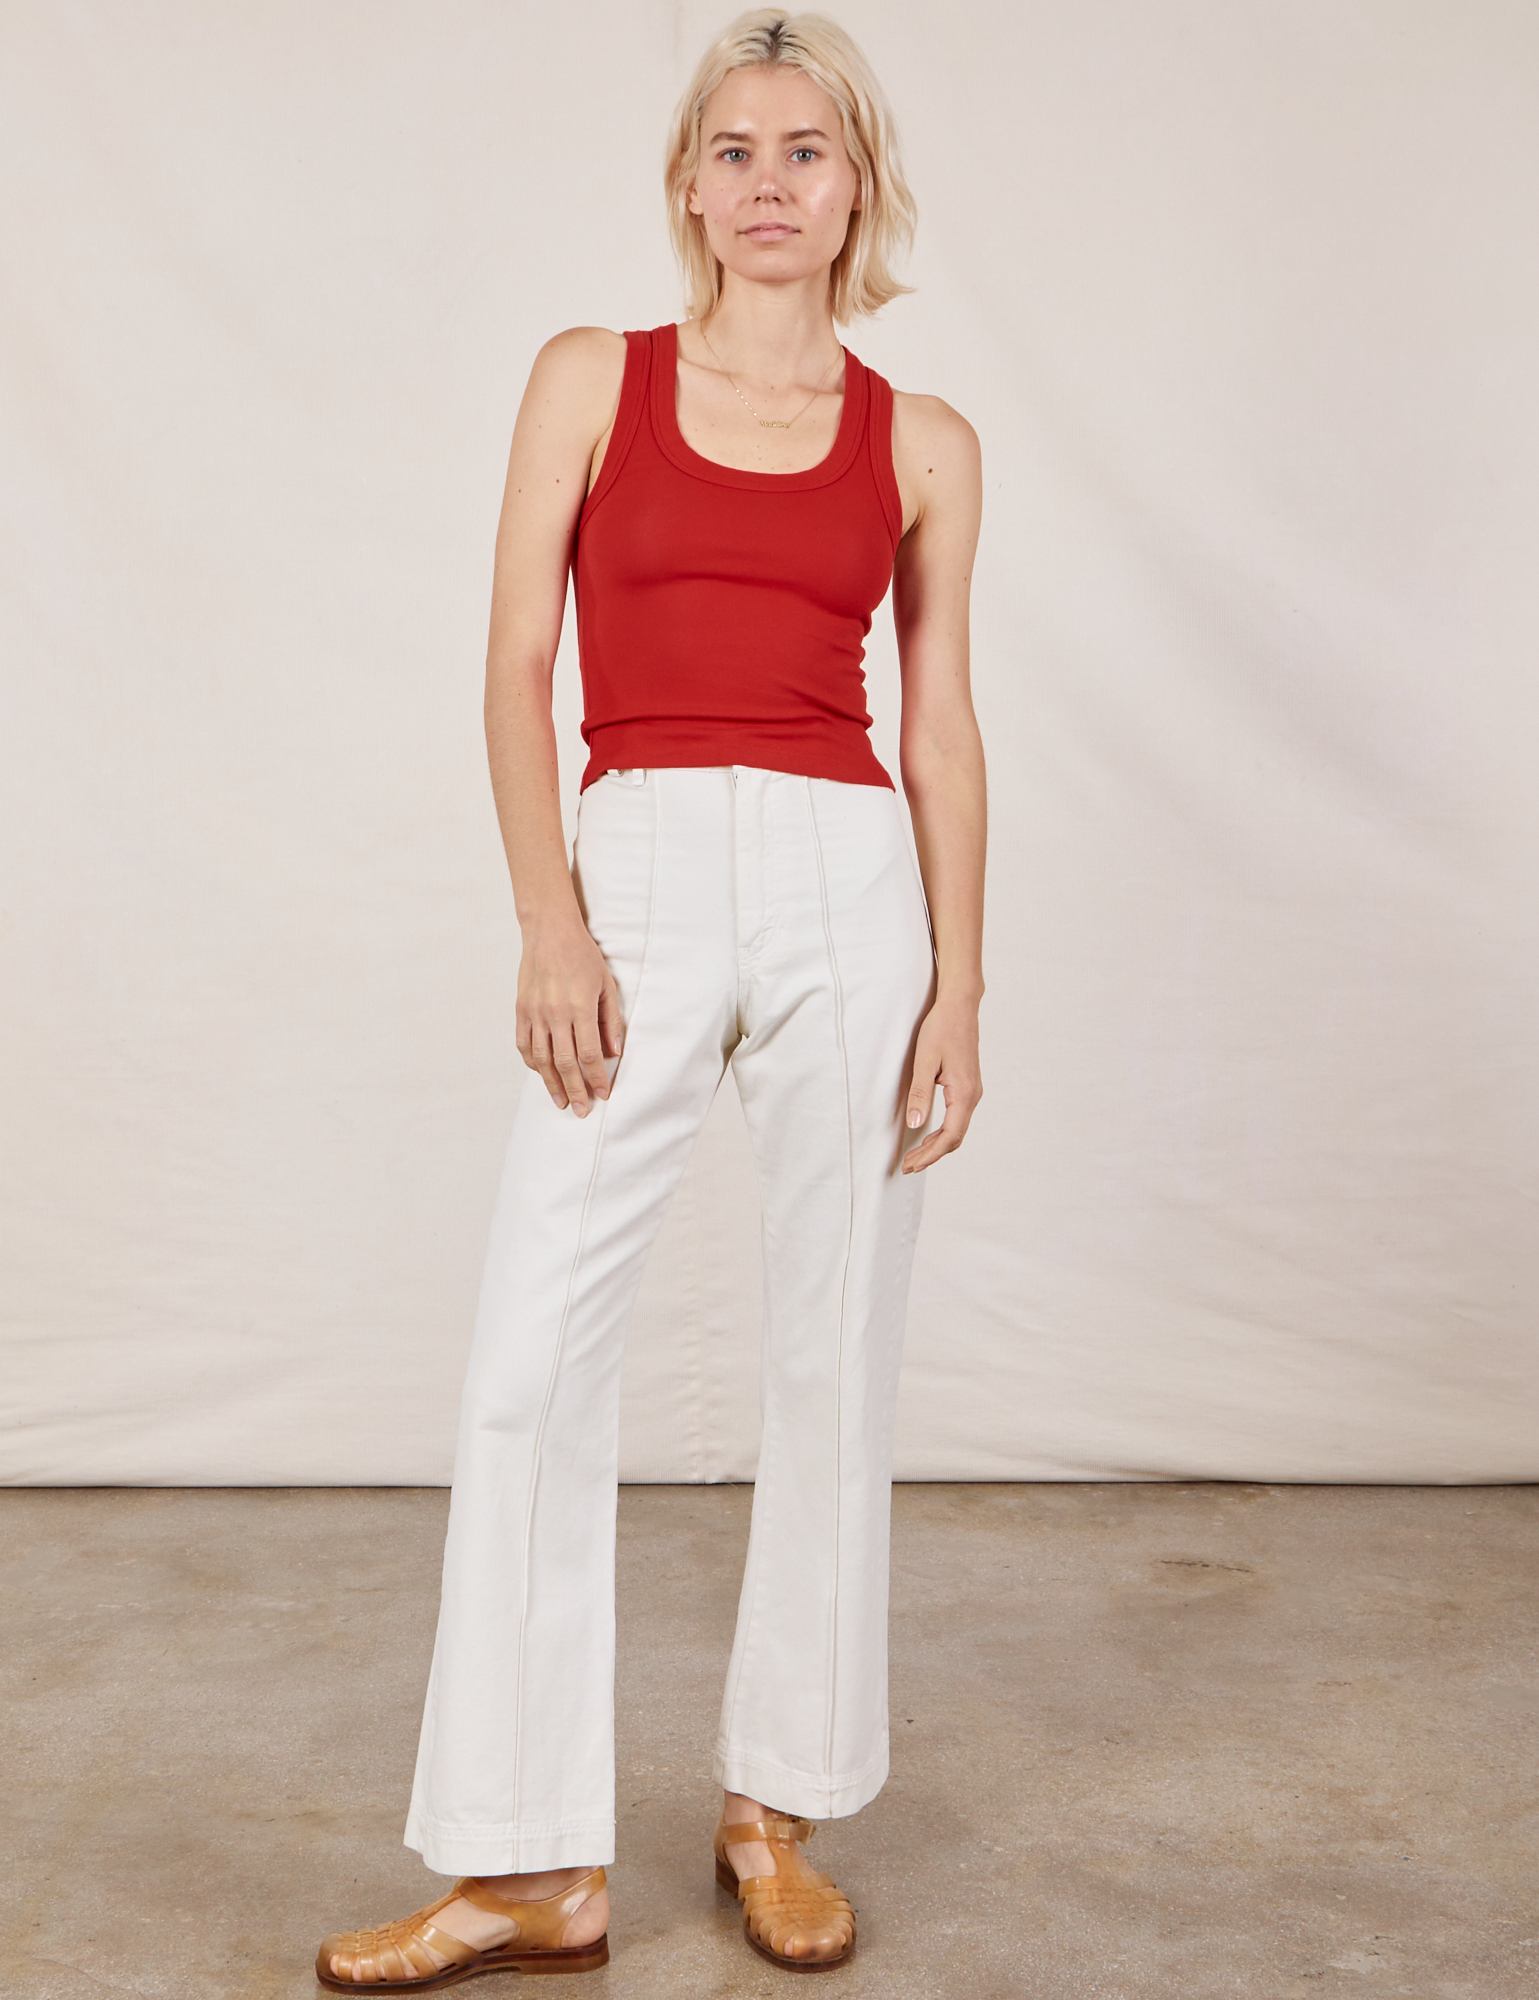 Madeline is 5&#39;9&quot; and wearing P Tank Top in Mustang Red paired with vintage tee off-white Western Pants